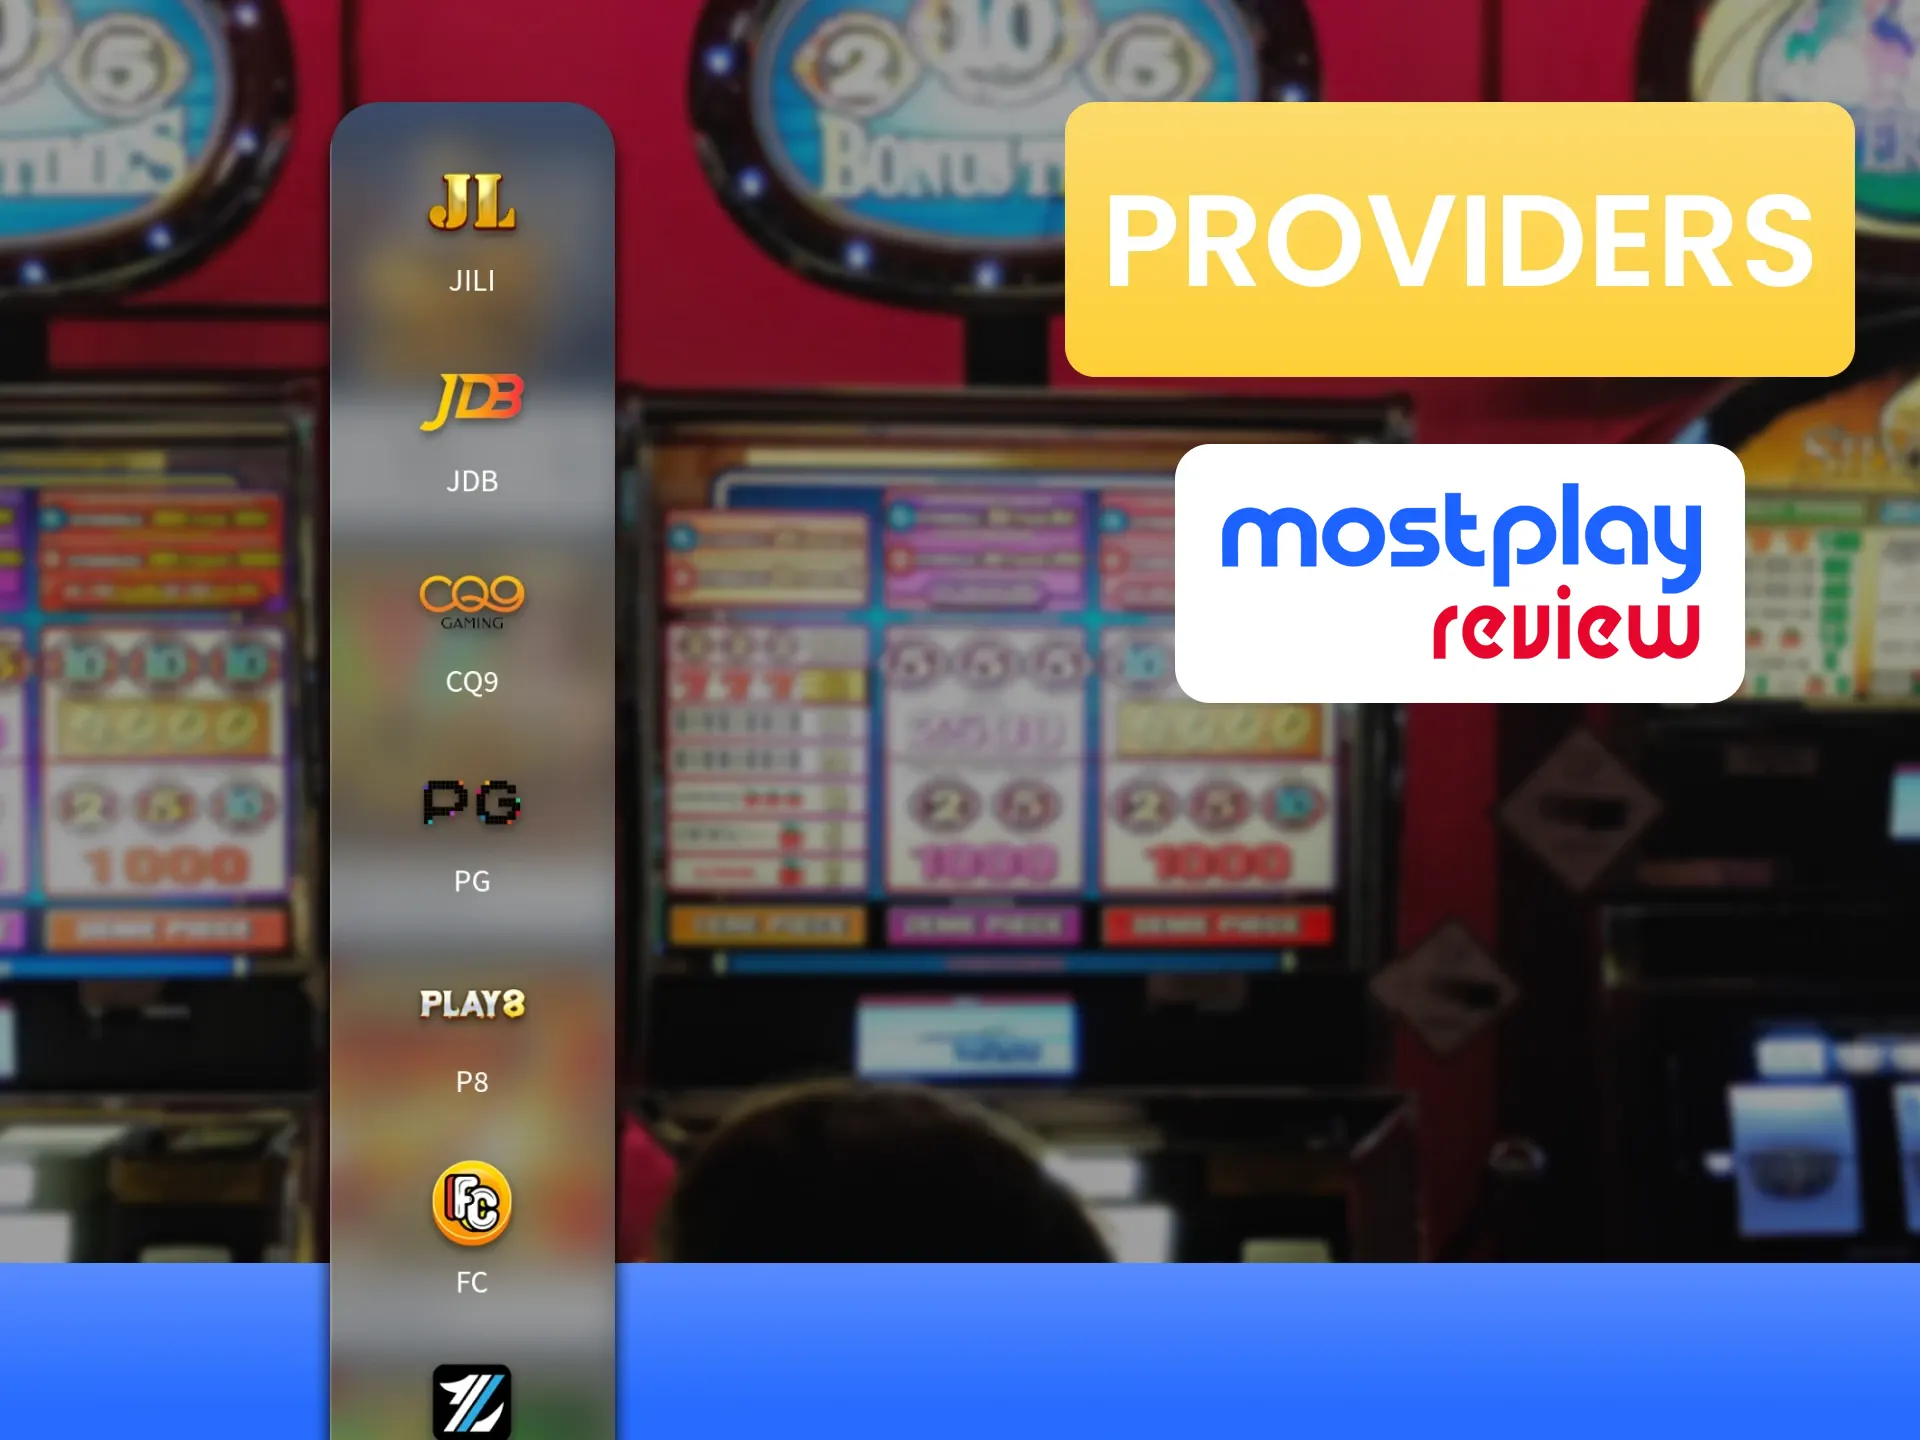 Find out which providers have slots games on Mostplay.